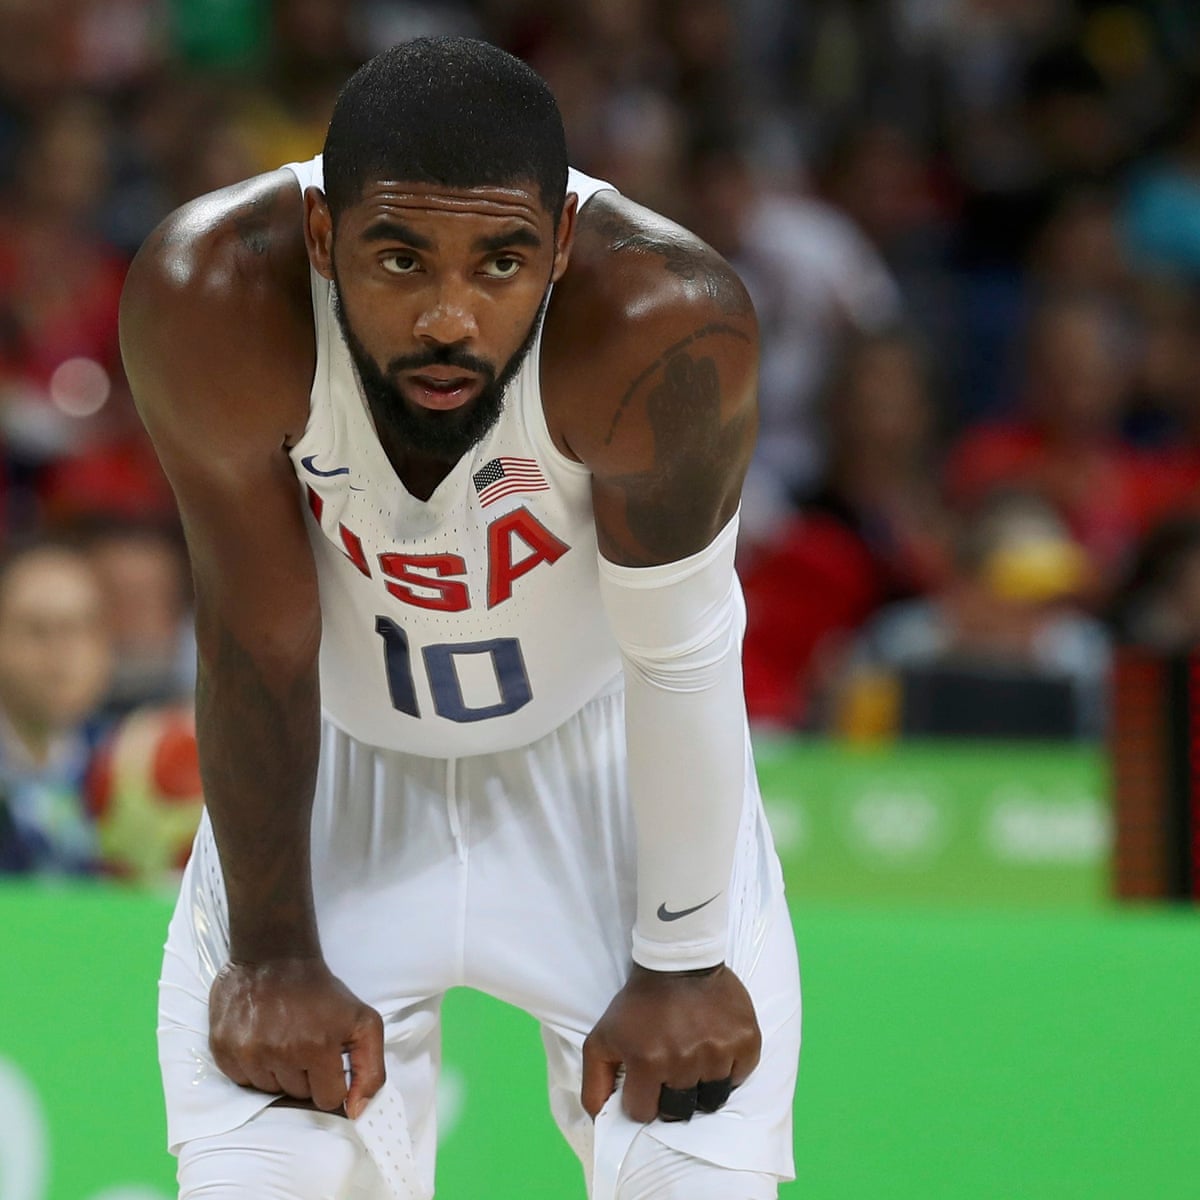 Why are NBA superstars shunning Team USA at the World Cup?